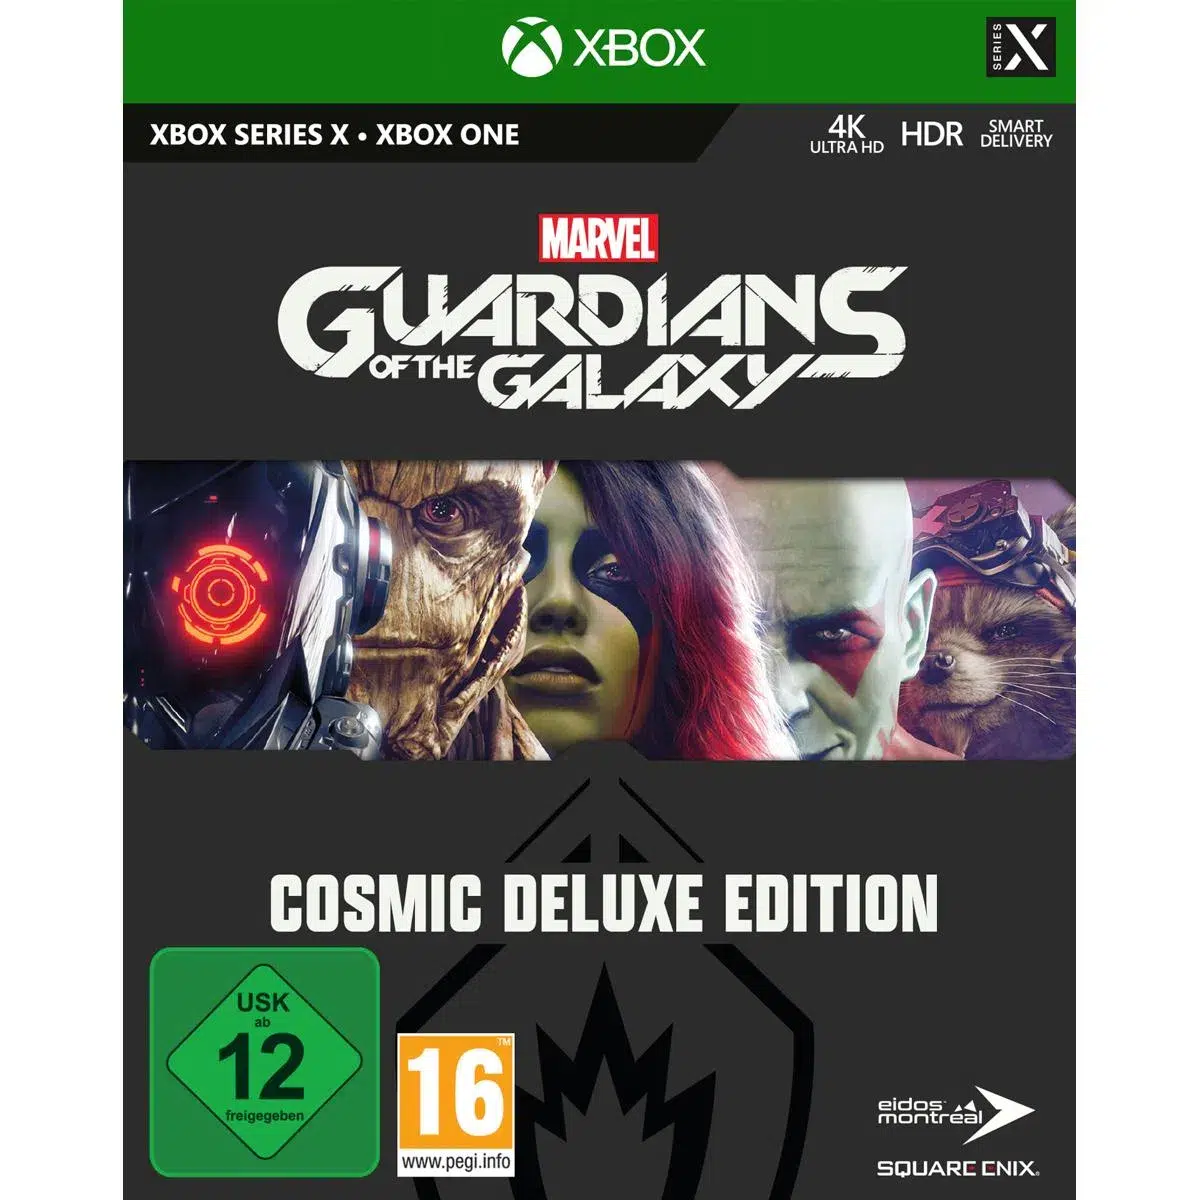 Marvel's Guardians of the Galaxy Cosmic Deluxe Edition (XSRX)